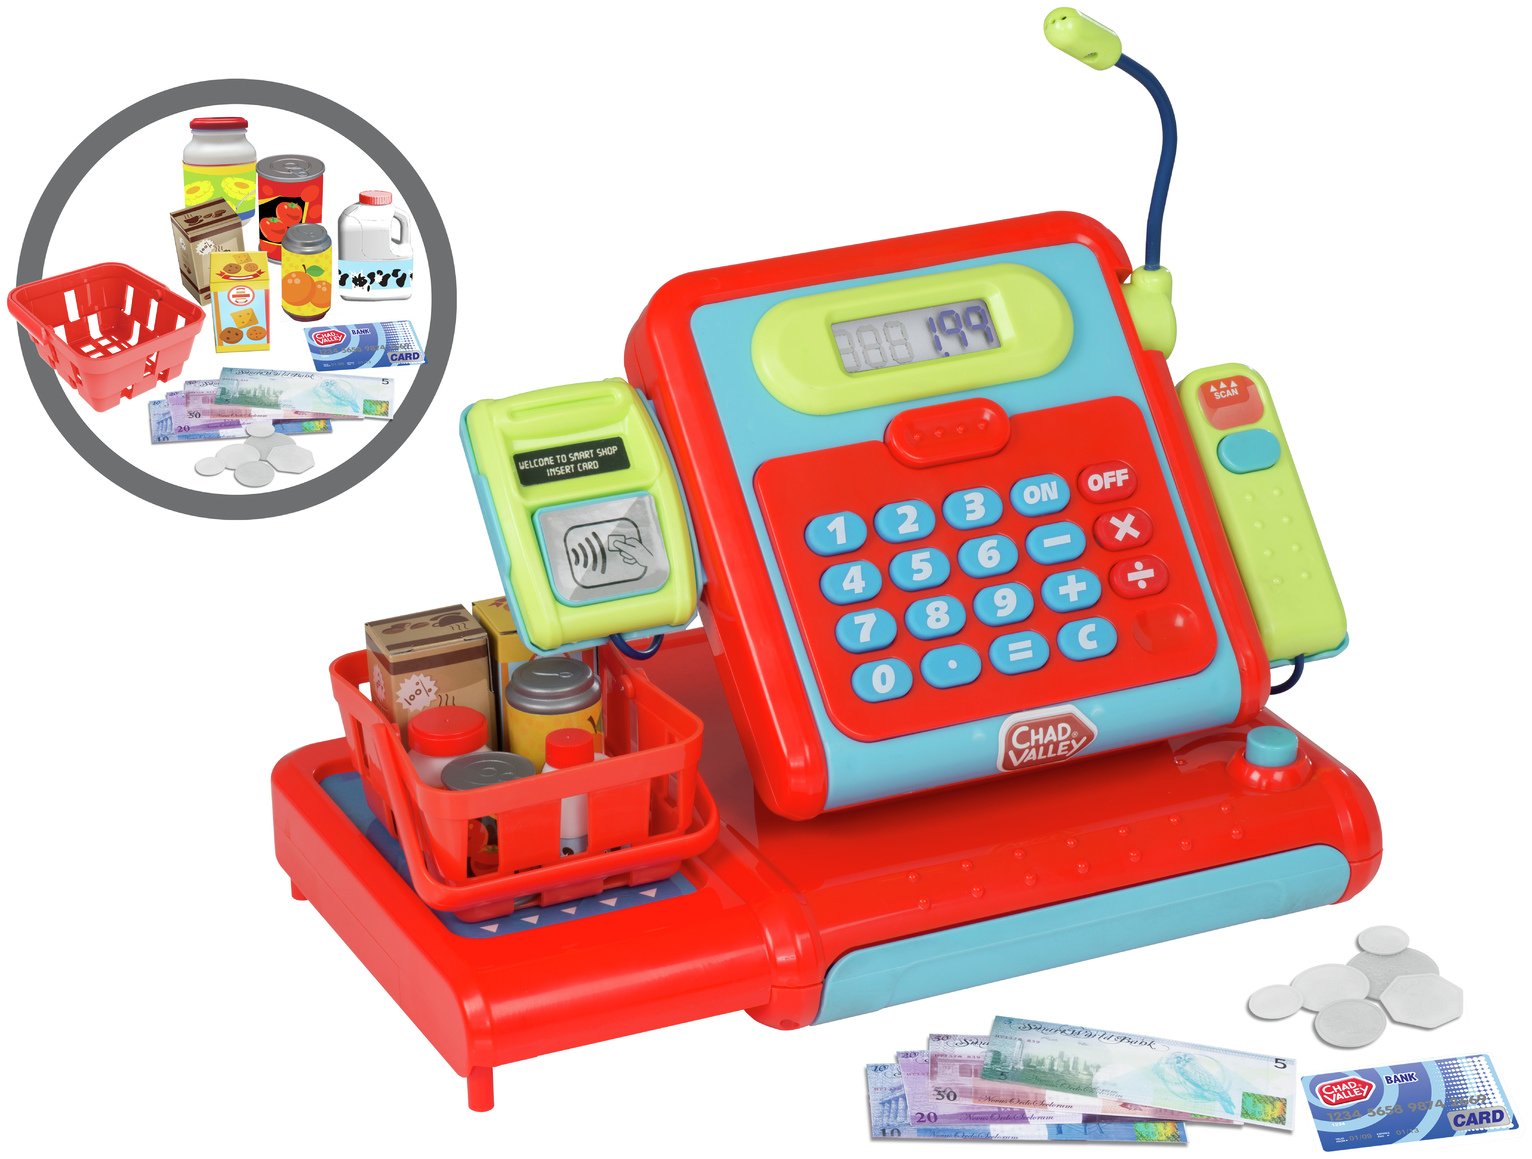 Chad Valley Premium Contactless Cash Register